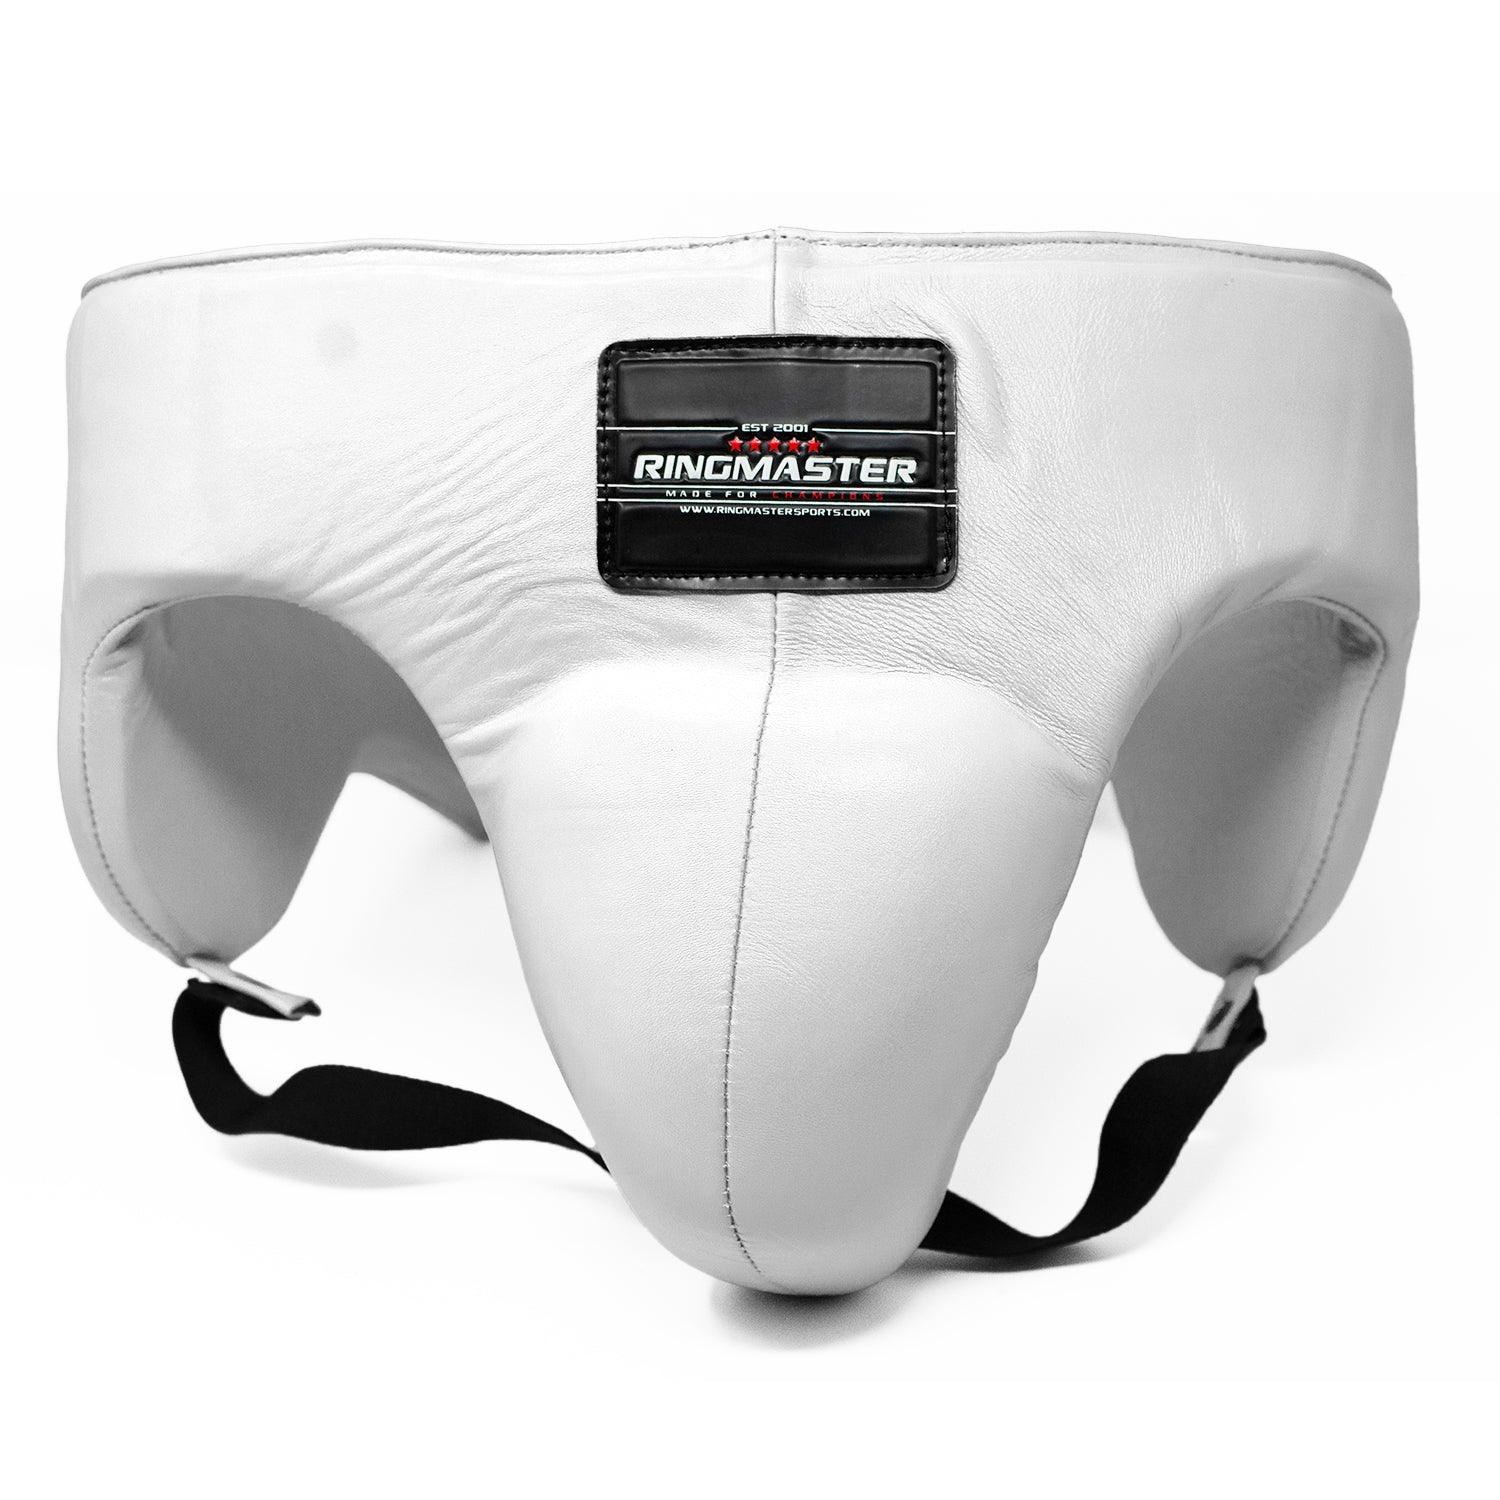 Meister Carbon Flex Groin Protector Cup for MMA, Boxing & Contact Sports